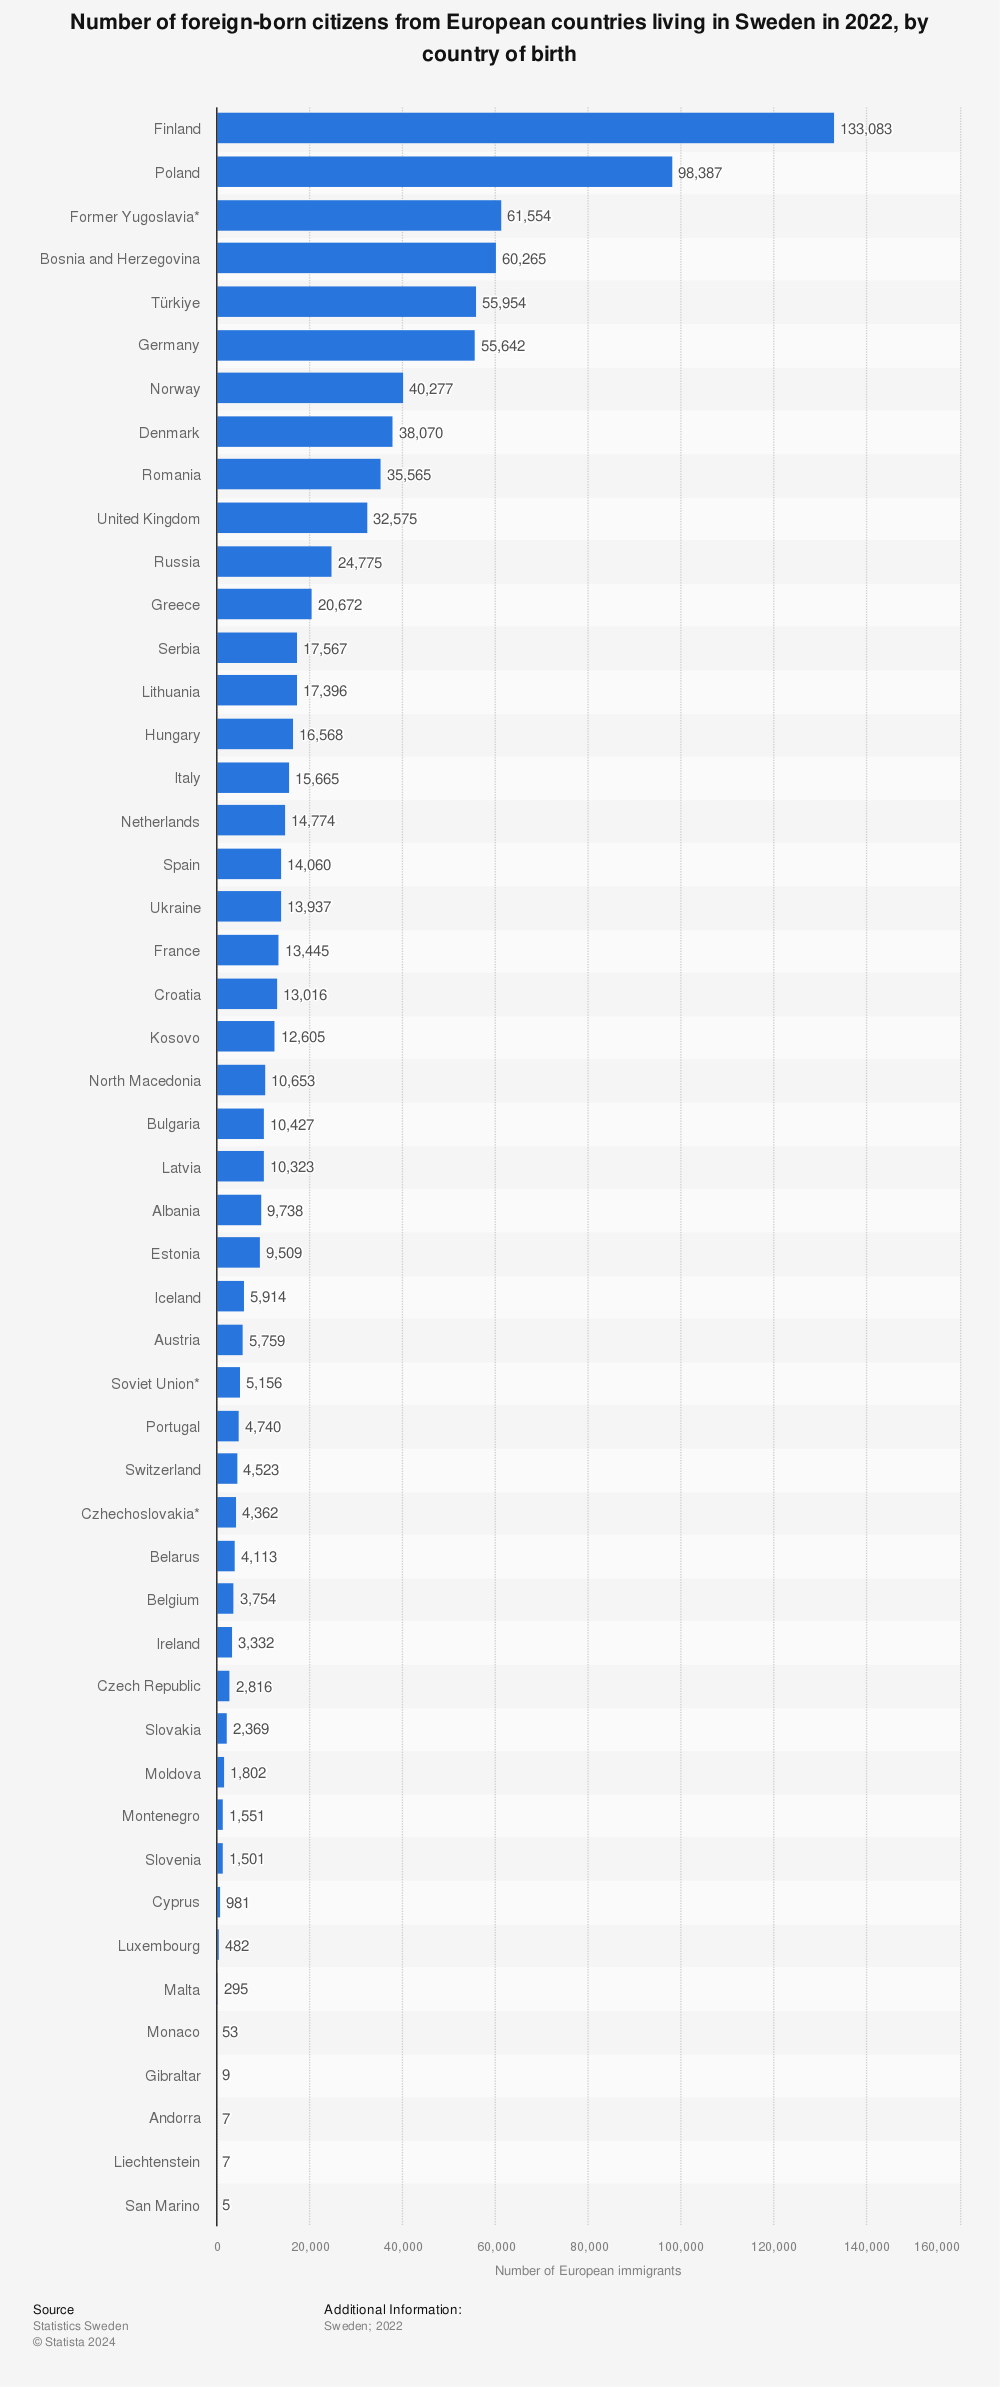 Statistic: Number of immigrants from European countries living in Sweden in 2020, by countries of birth | Statista